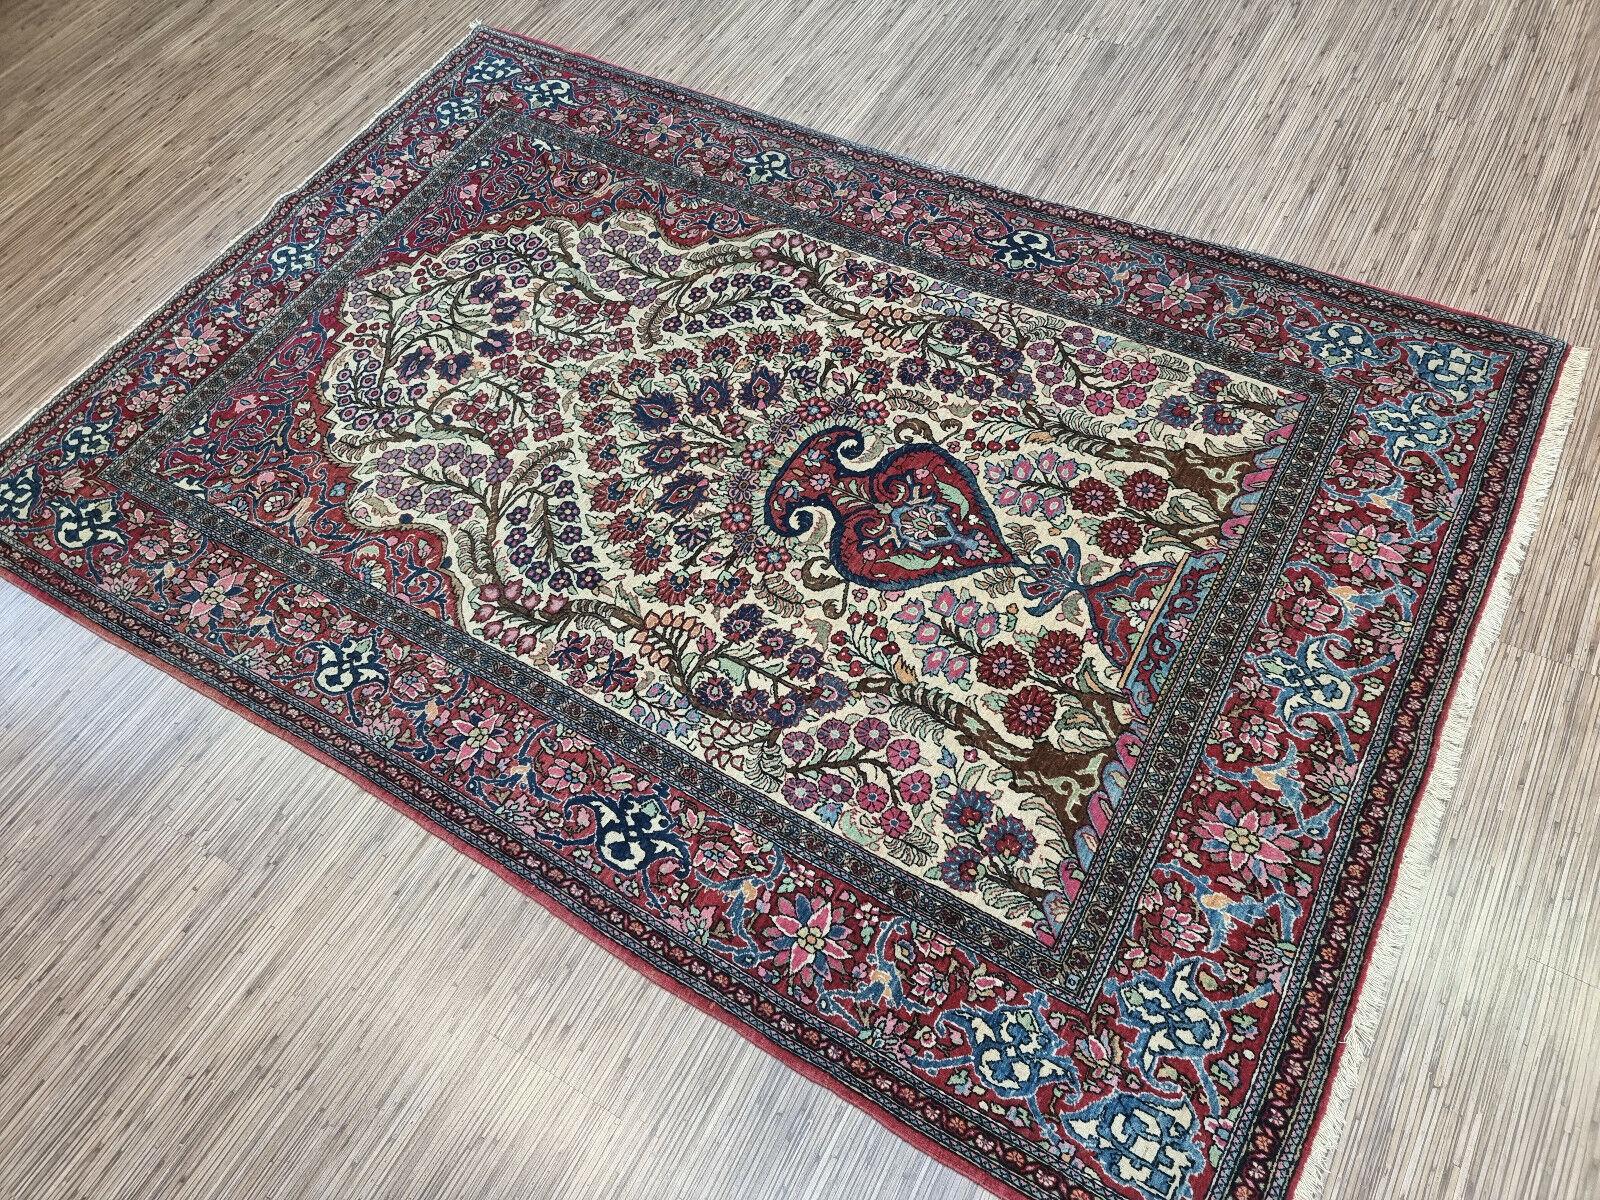 Handmade Antique Persian Style Isfahan Prayer Rug 4.6’ x 6.8’, 1900s, Good Condition, Wool

Bring home a piece of history and elegance with this handmade antique Persian style Isfahan prayer rug. This stunning rug was crafted in the 1900s,